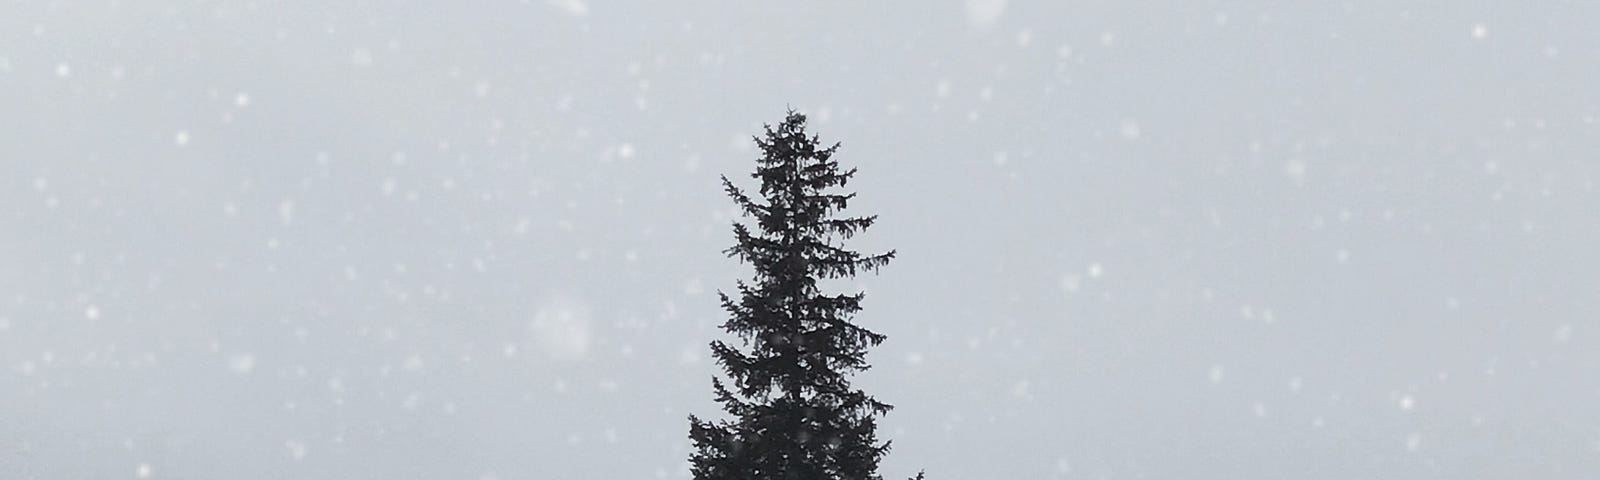 A lone, possible Christmas tree in a snowy field.